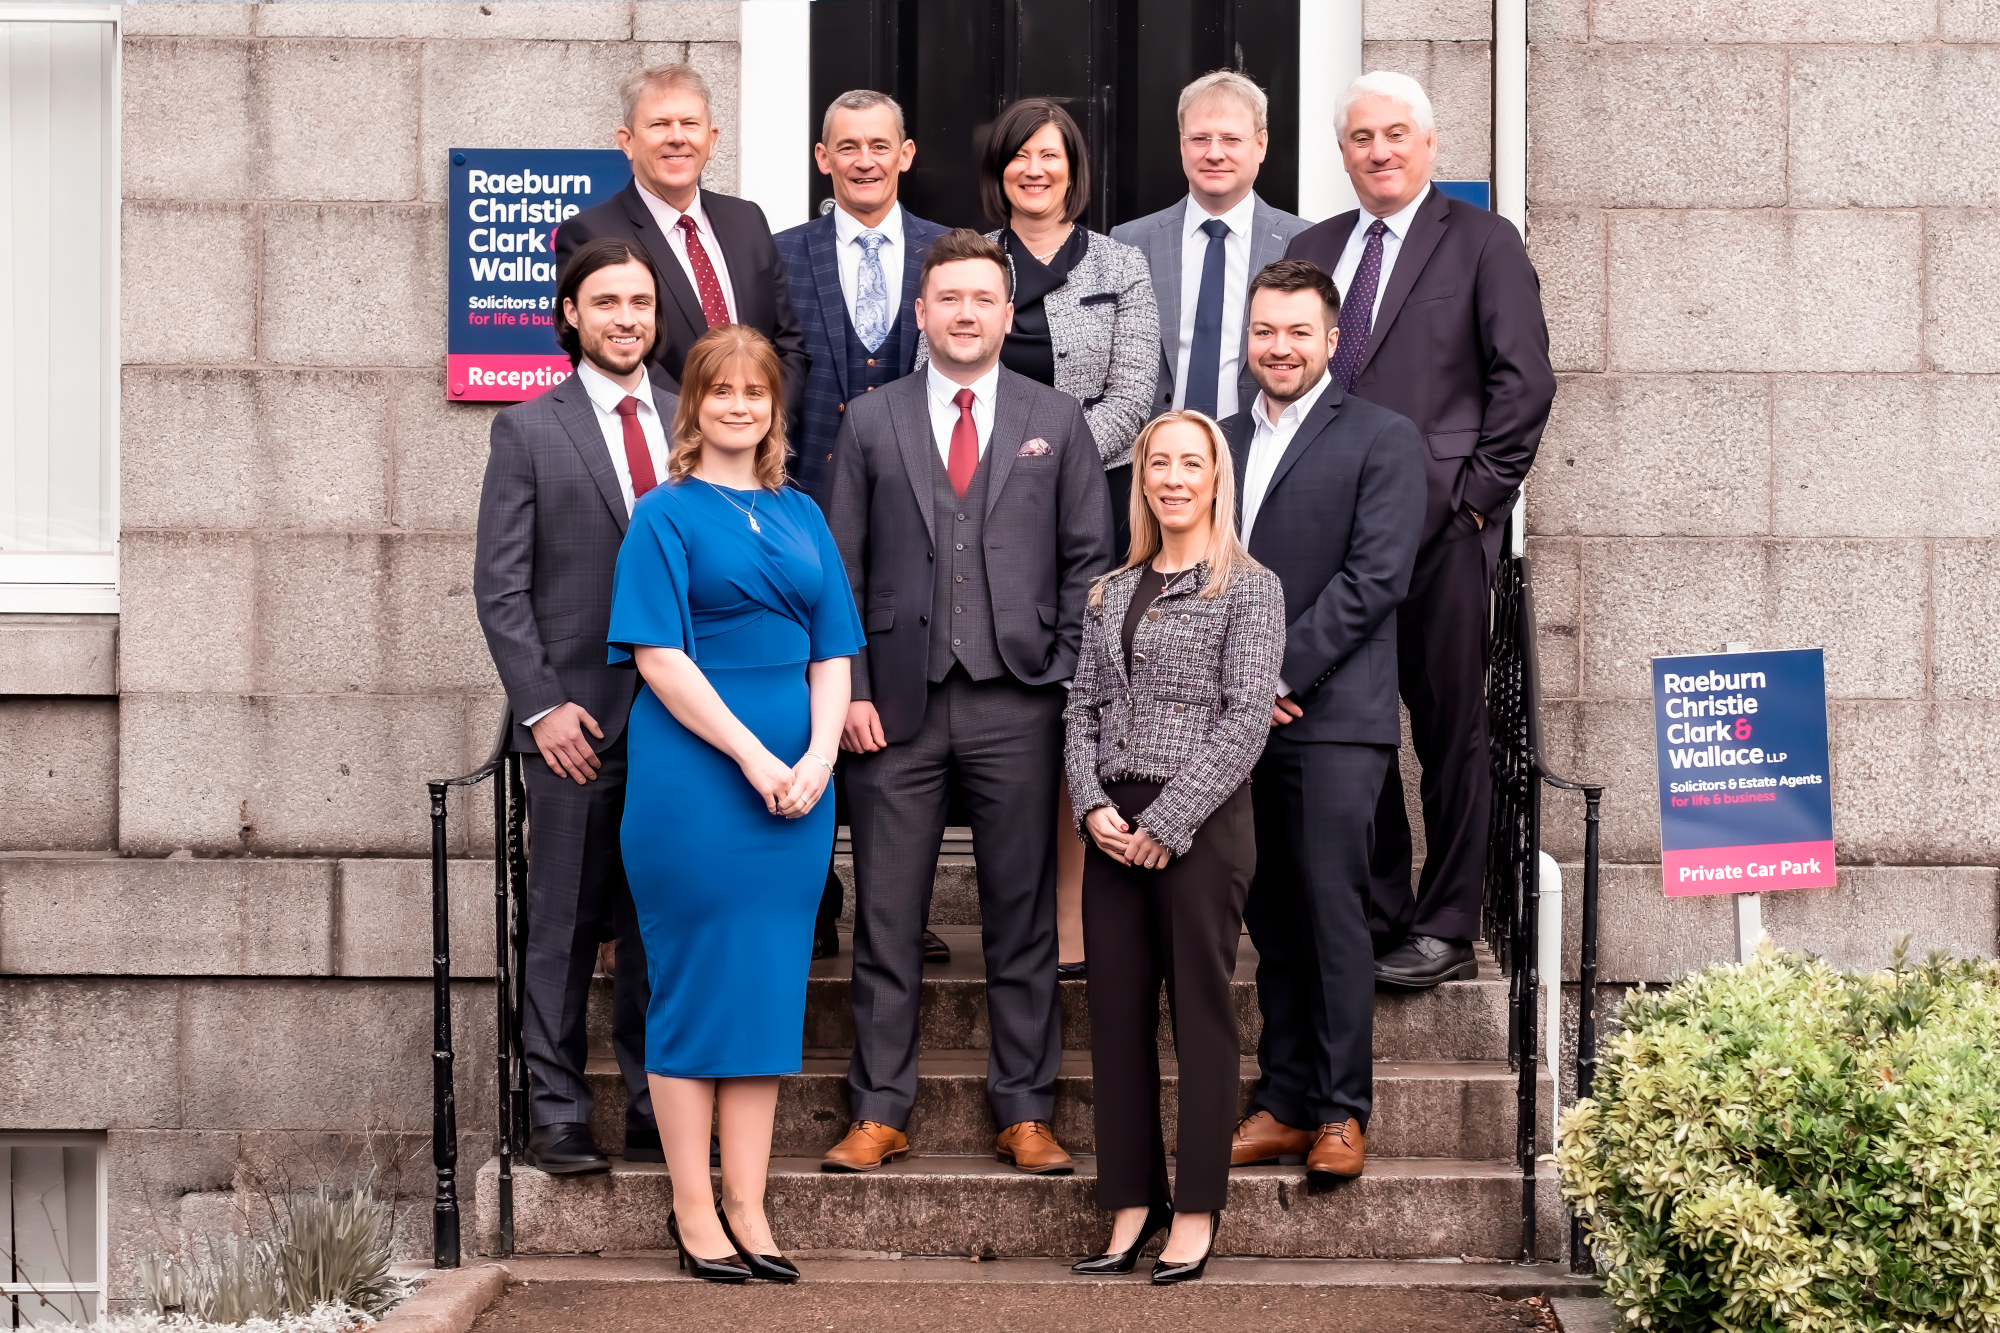 Promotions at Raeburn Christie Clark & Wallace